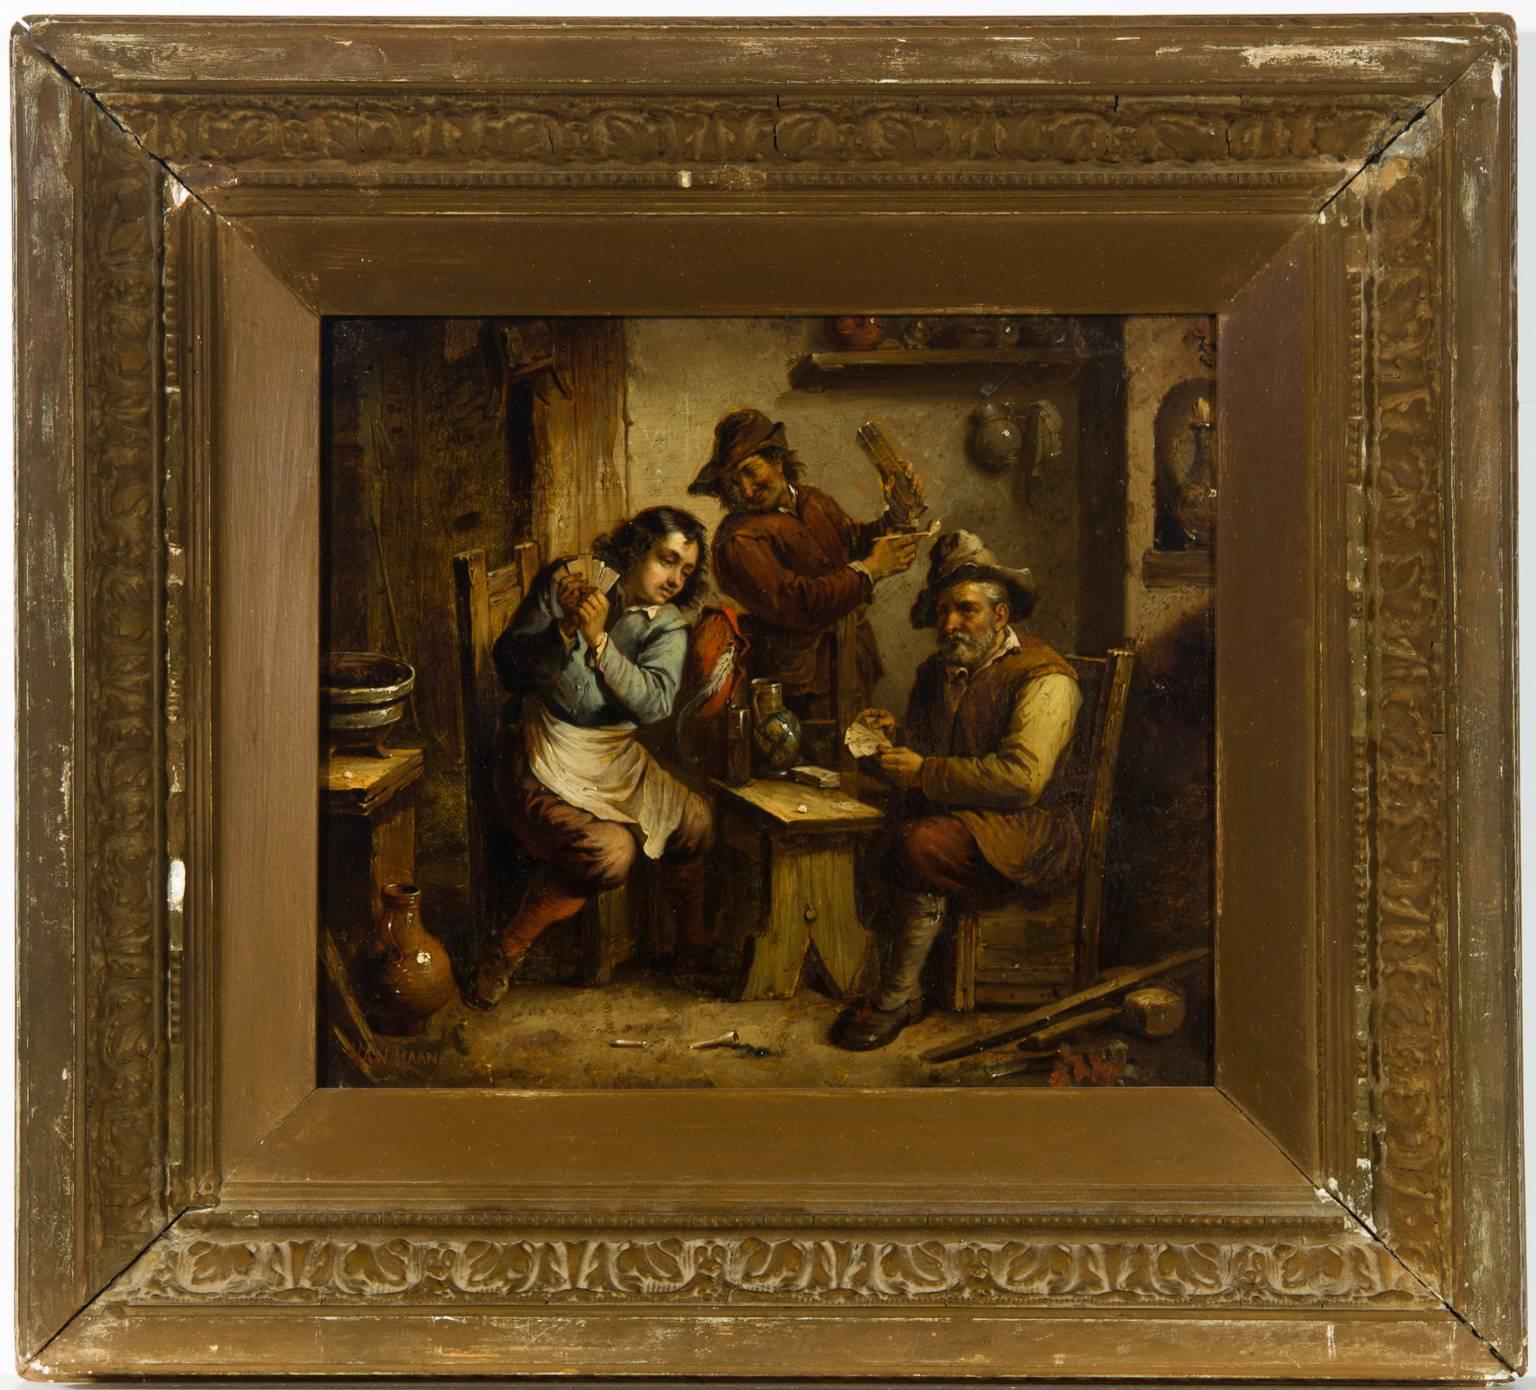 Unknown Interior Painting - Van Haan - 19th Century Signed Dutch Oil, Card Players